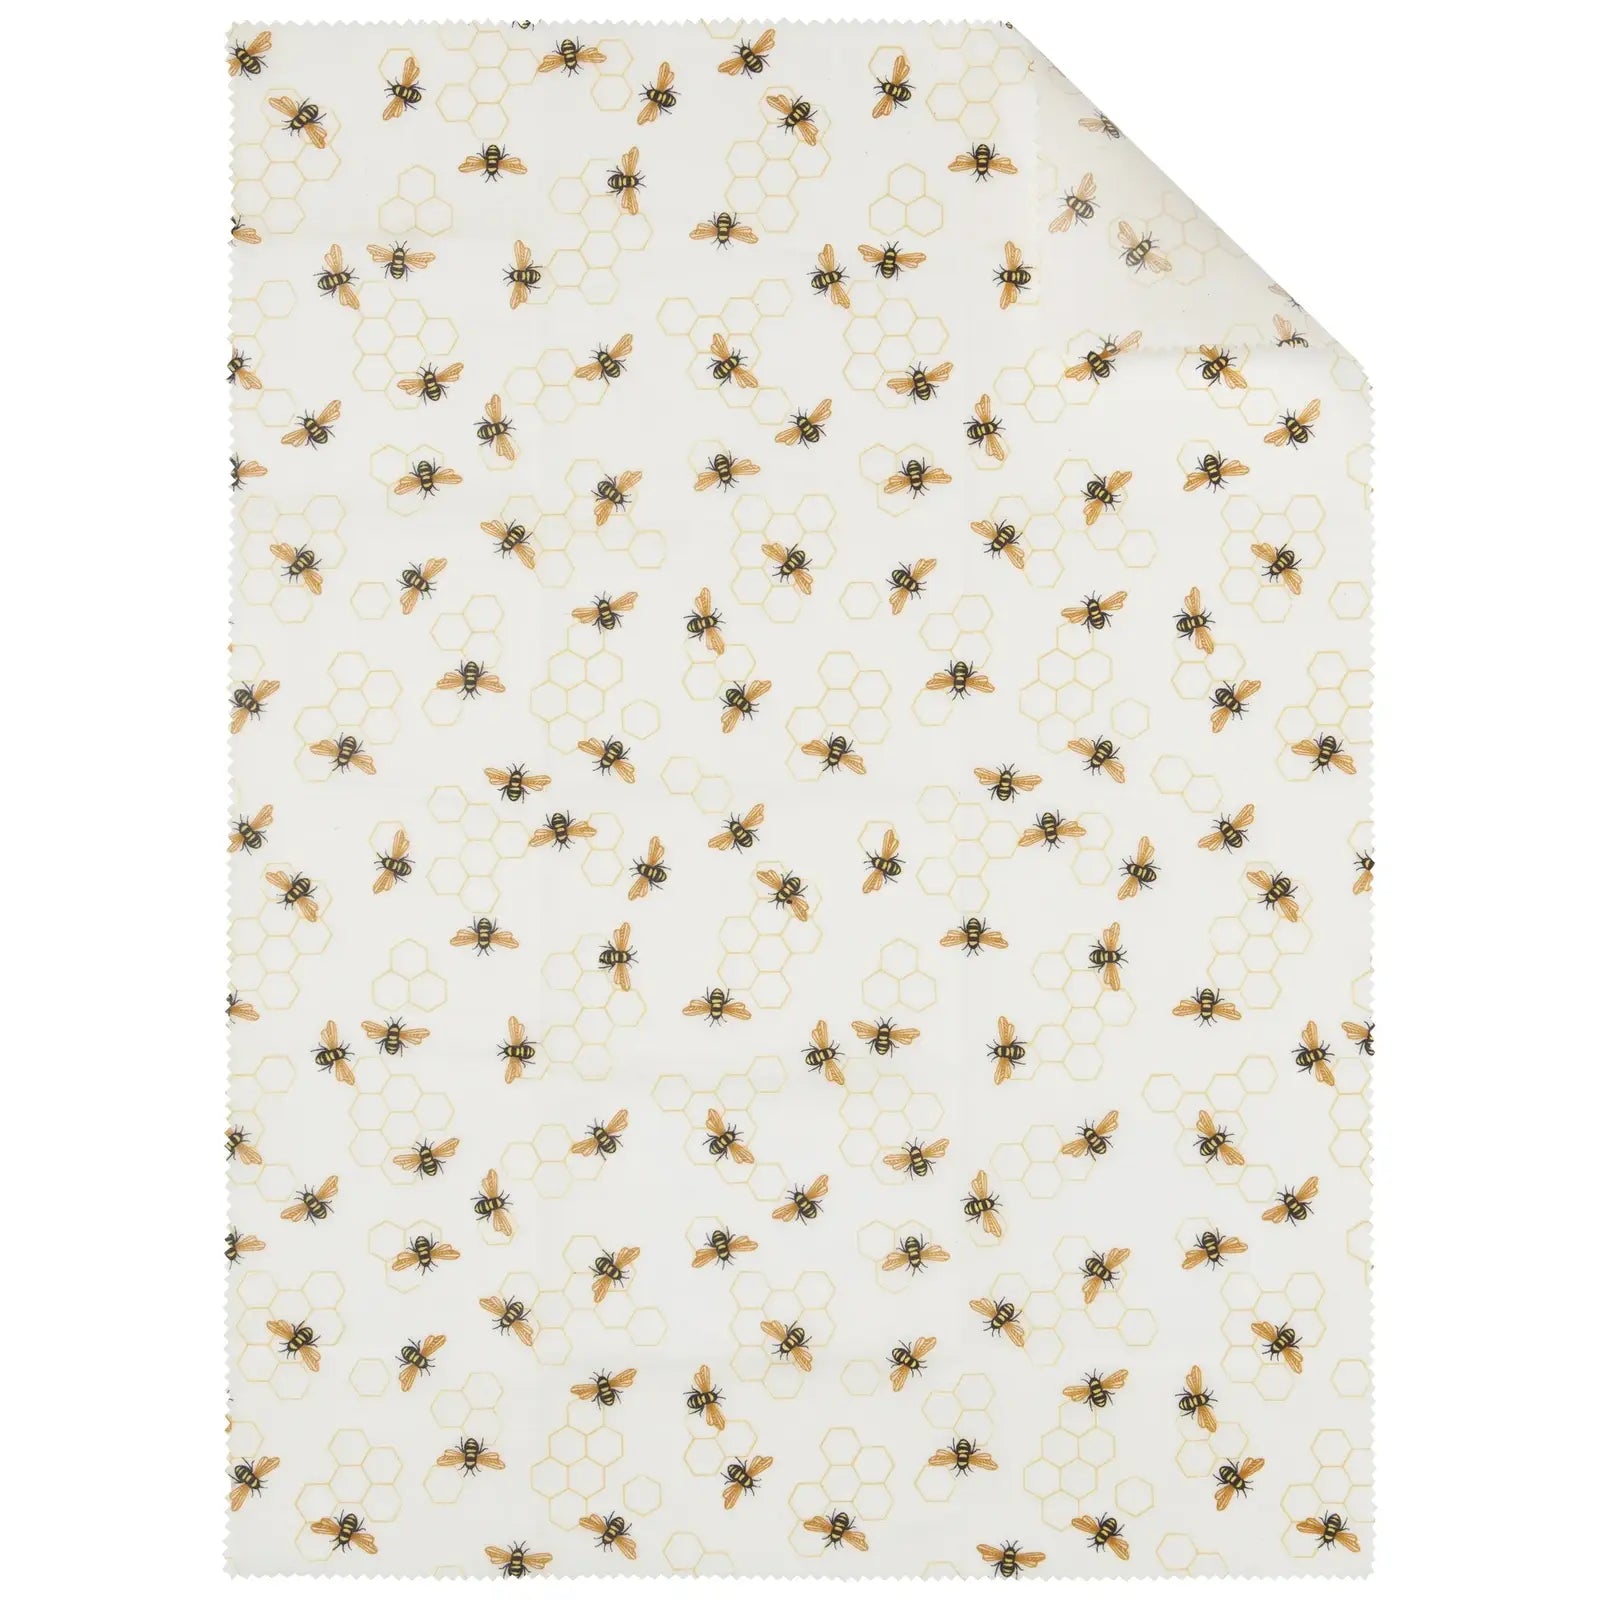 Bees Beeswax Wrap XL